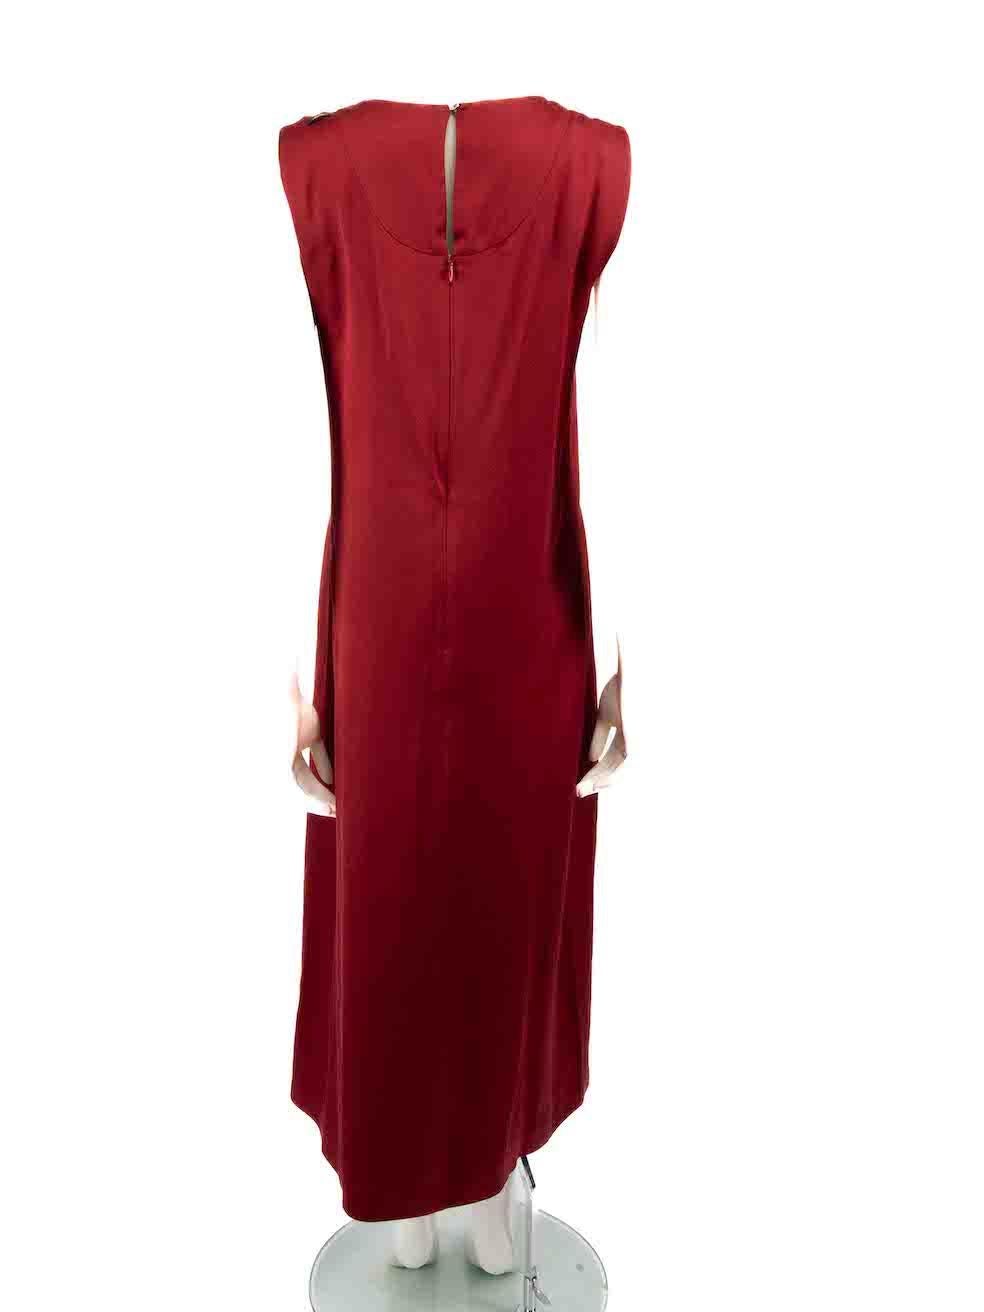 Max Mara S' Max Mara Red Sleeveless Midi Dress Size M In Good Condition For Sale In London, GB